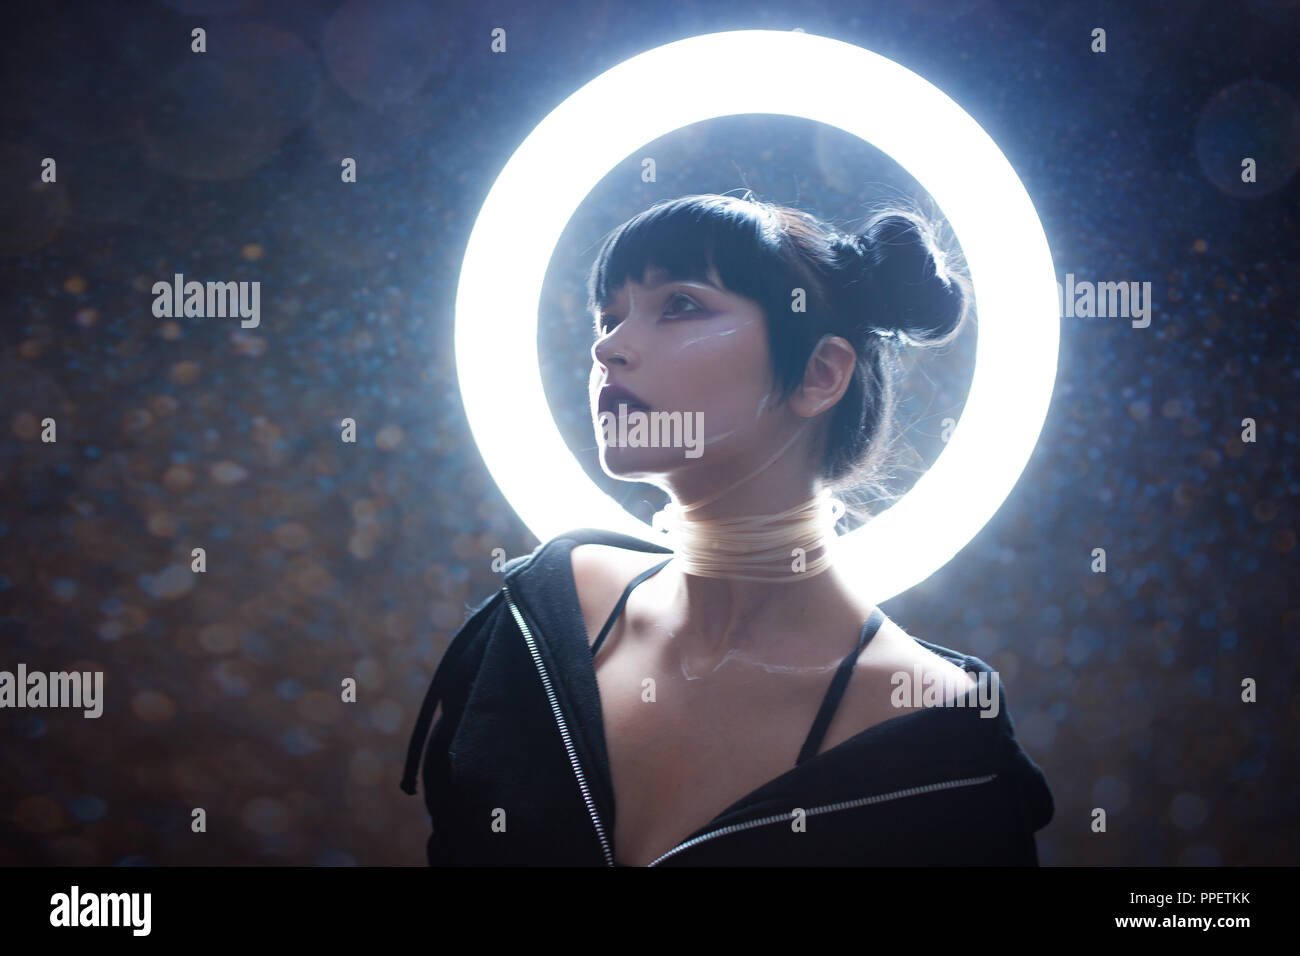 concept of artificial life. Beautiful young woman, futuristic style. Portrait against a glowing circle Stock Photo